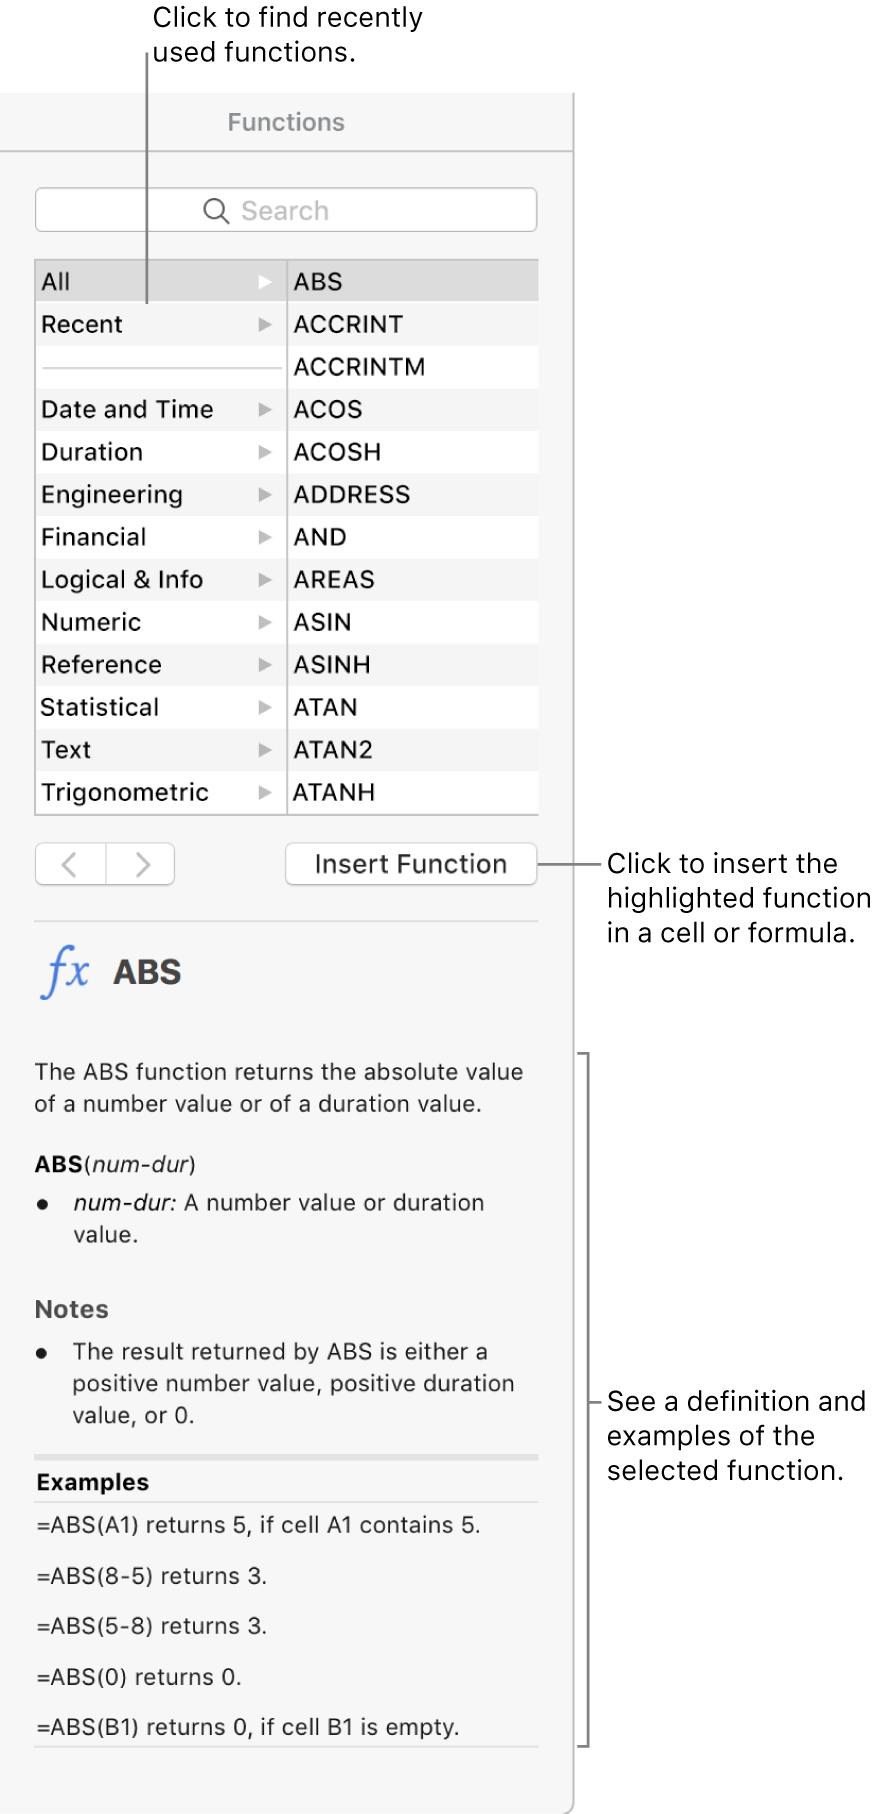 The Function Browser with callouts to recently used functions, the Insert Function button and the function definition.